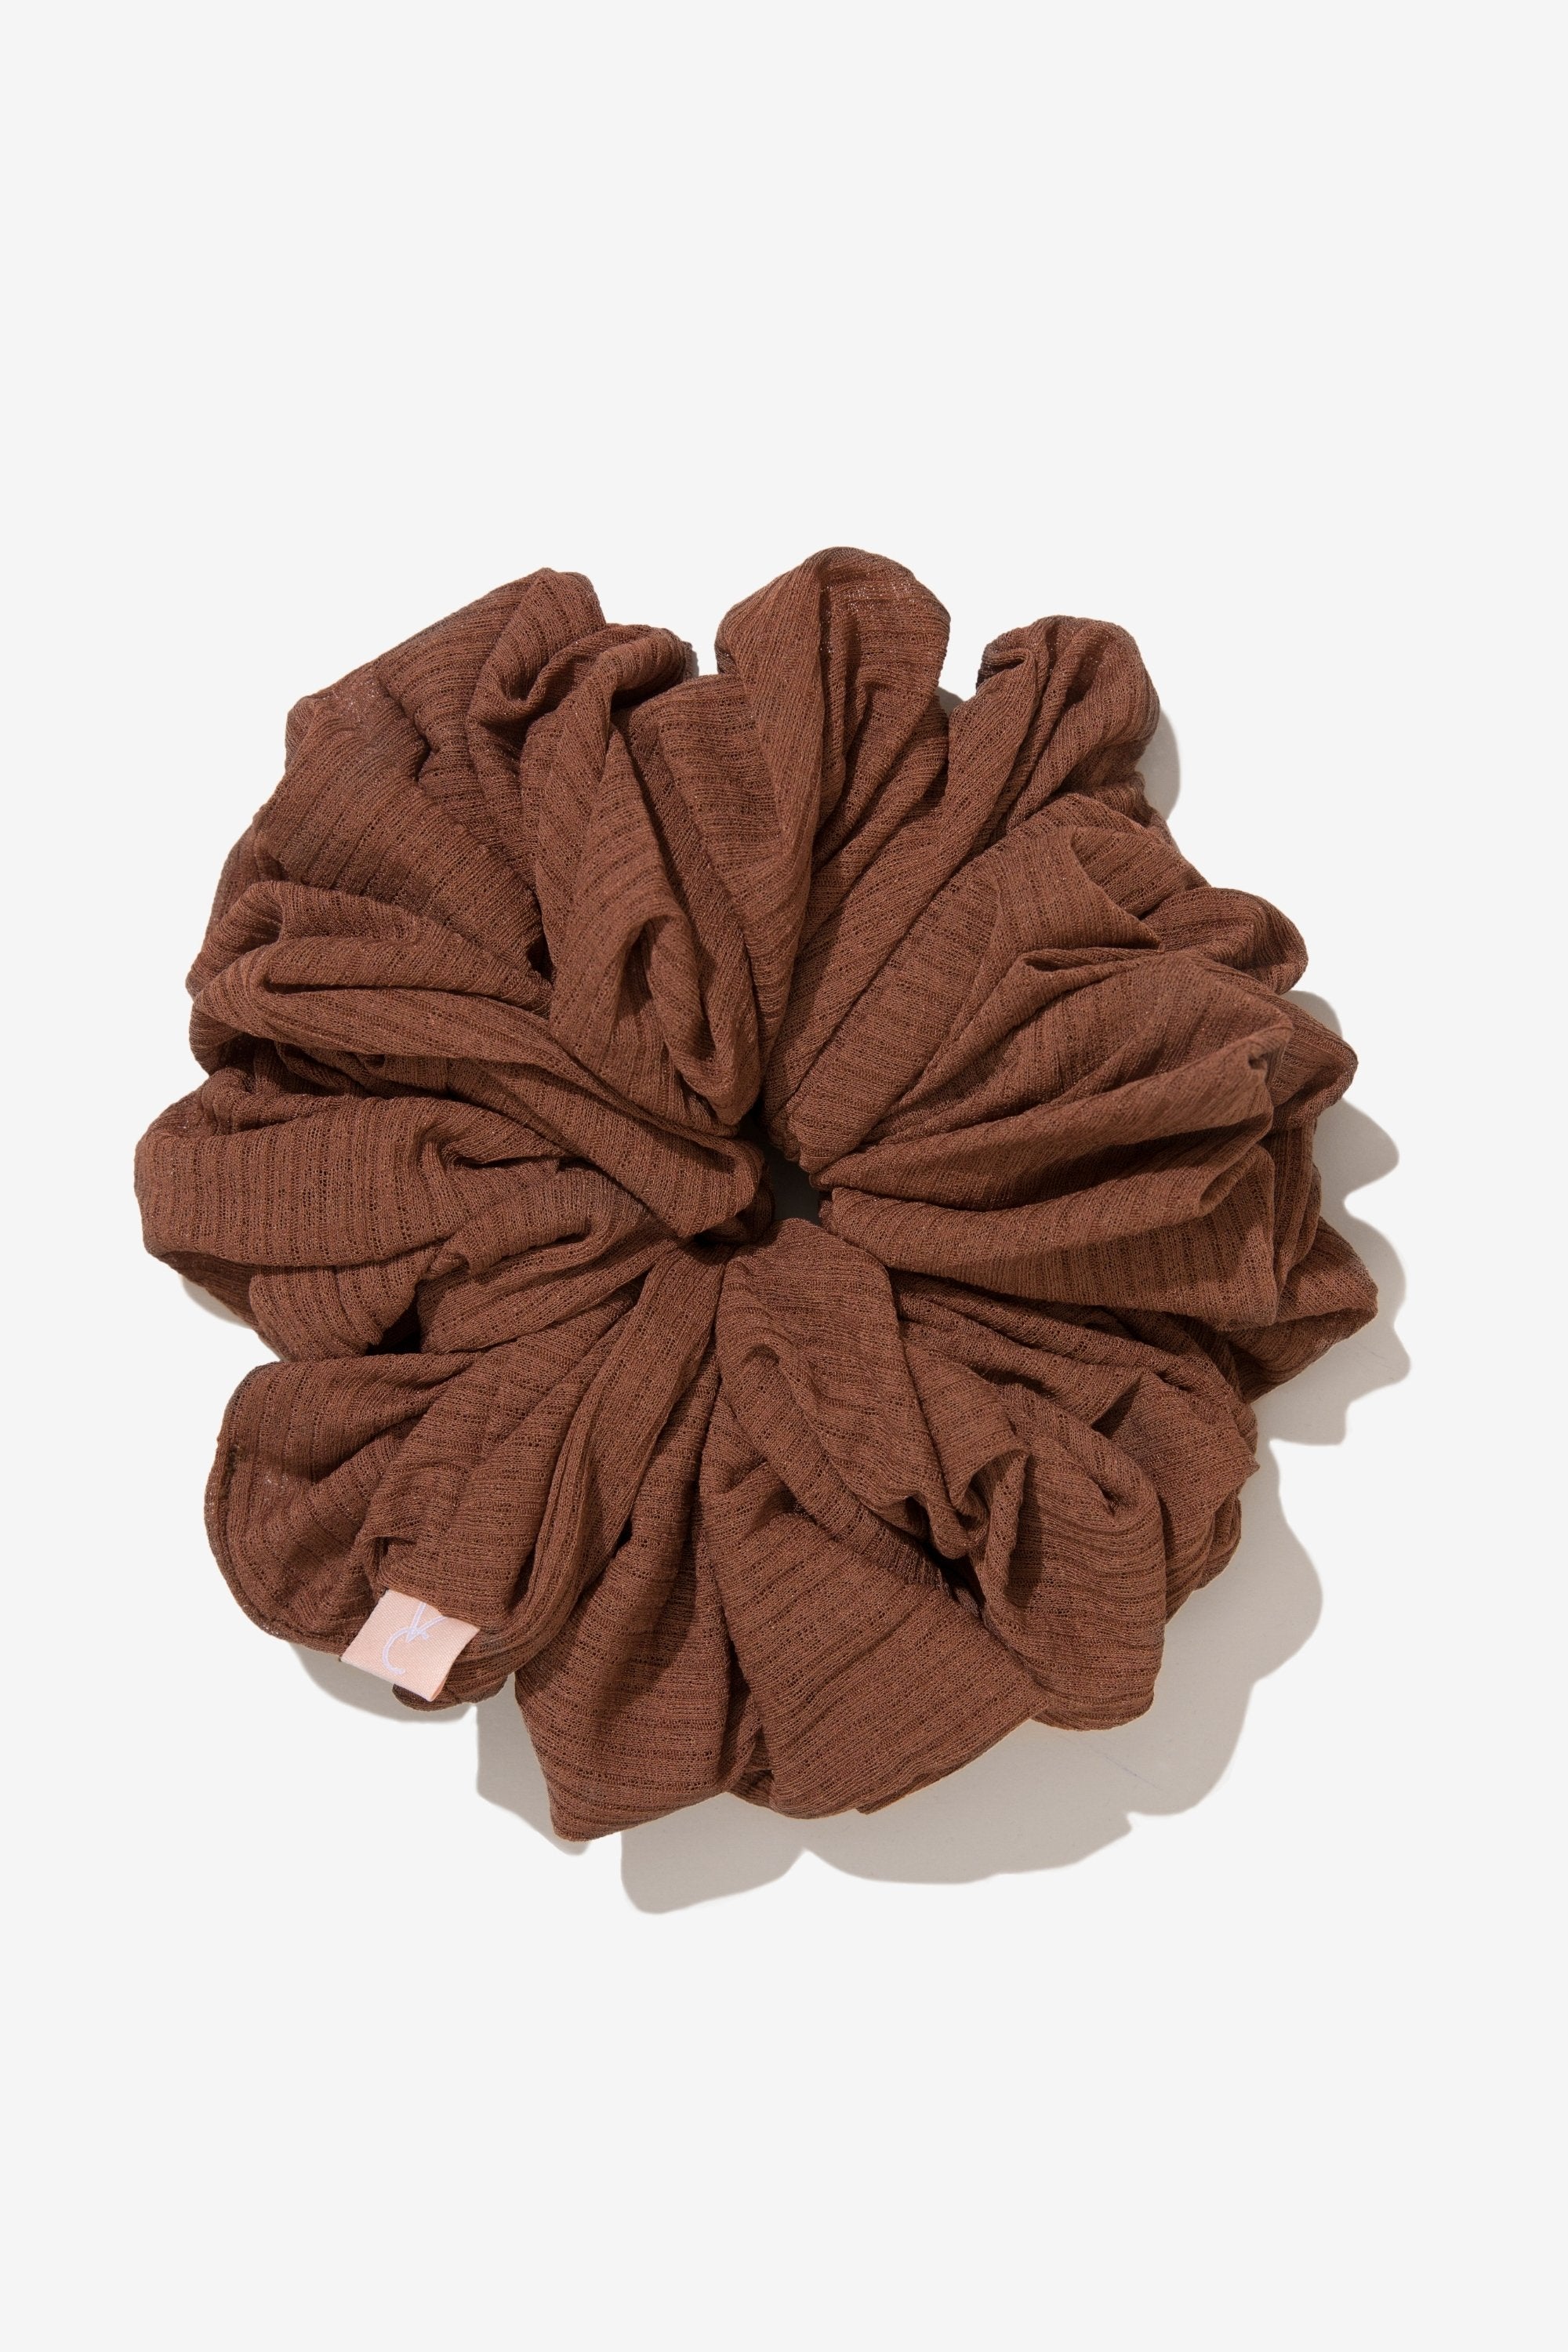 Ribbed Volume Scrunchie - Soft Brown Veiled Collection Large 